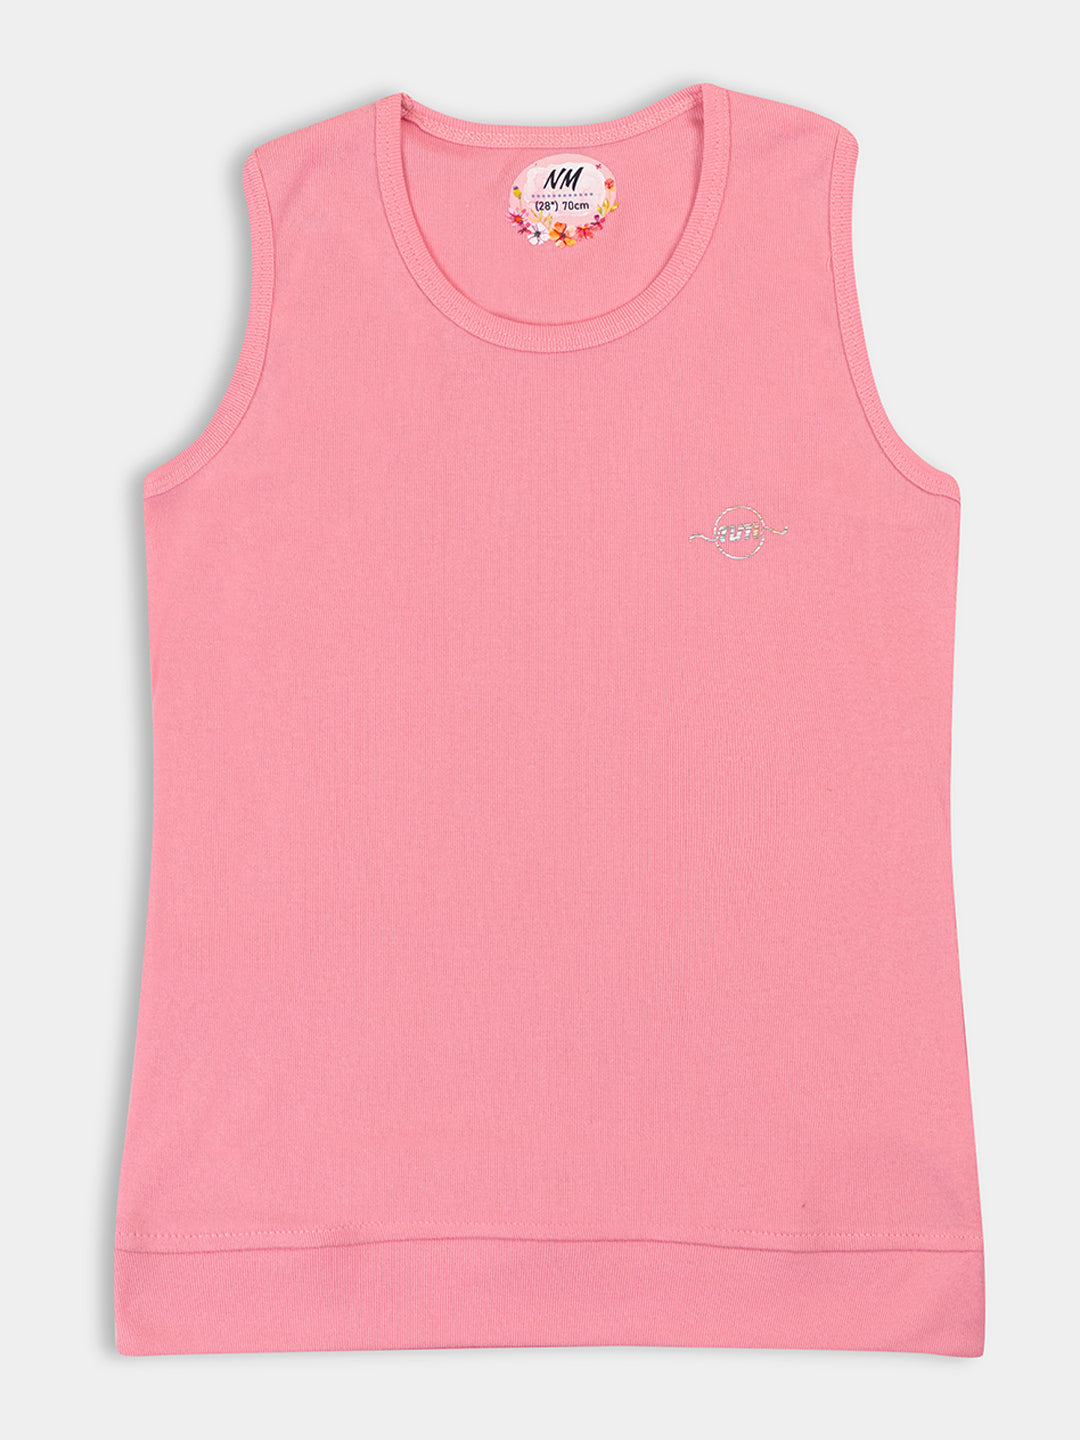 Adorable Girls' Sleeveless Top 3-Combo: Solid Colors